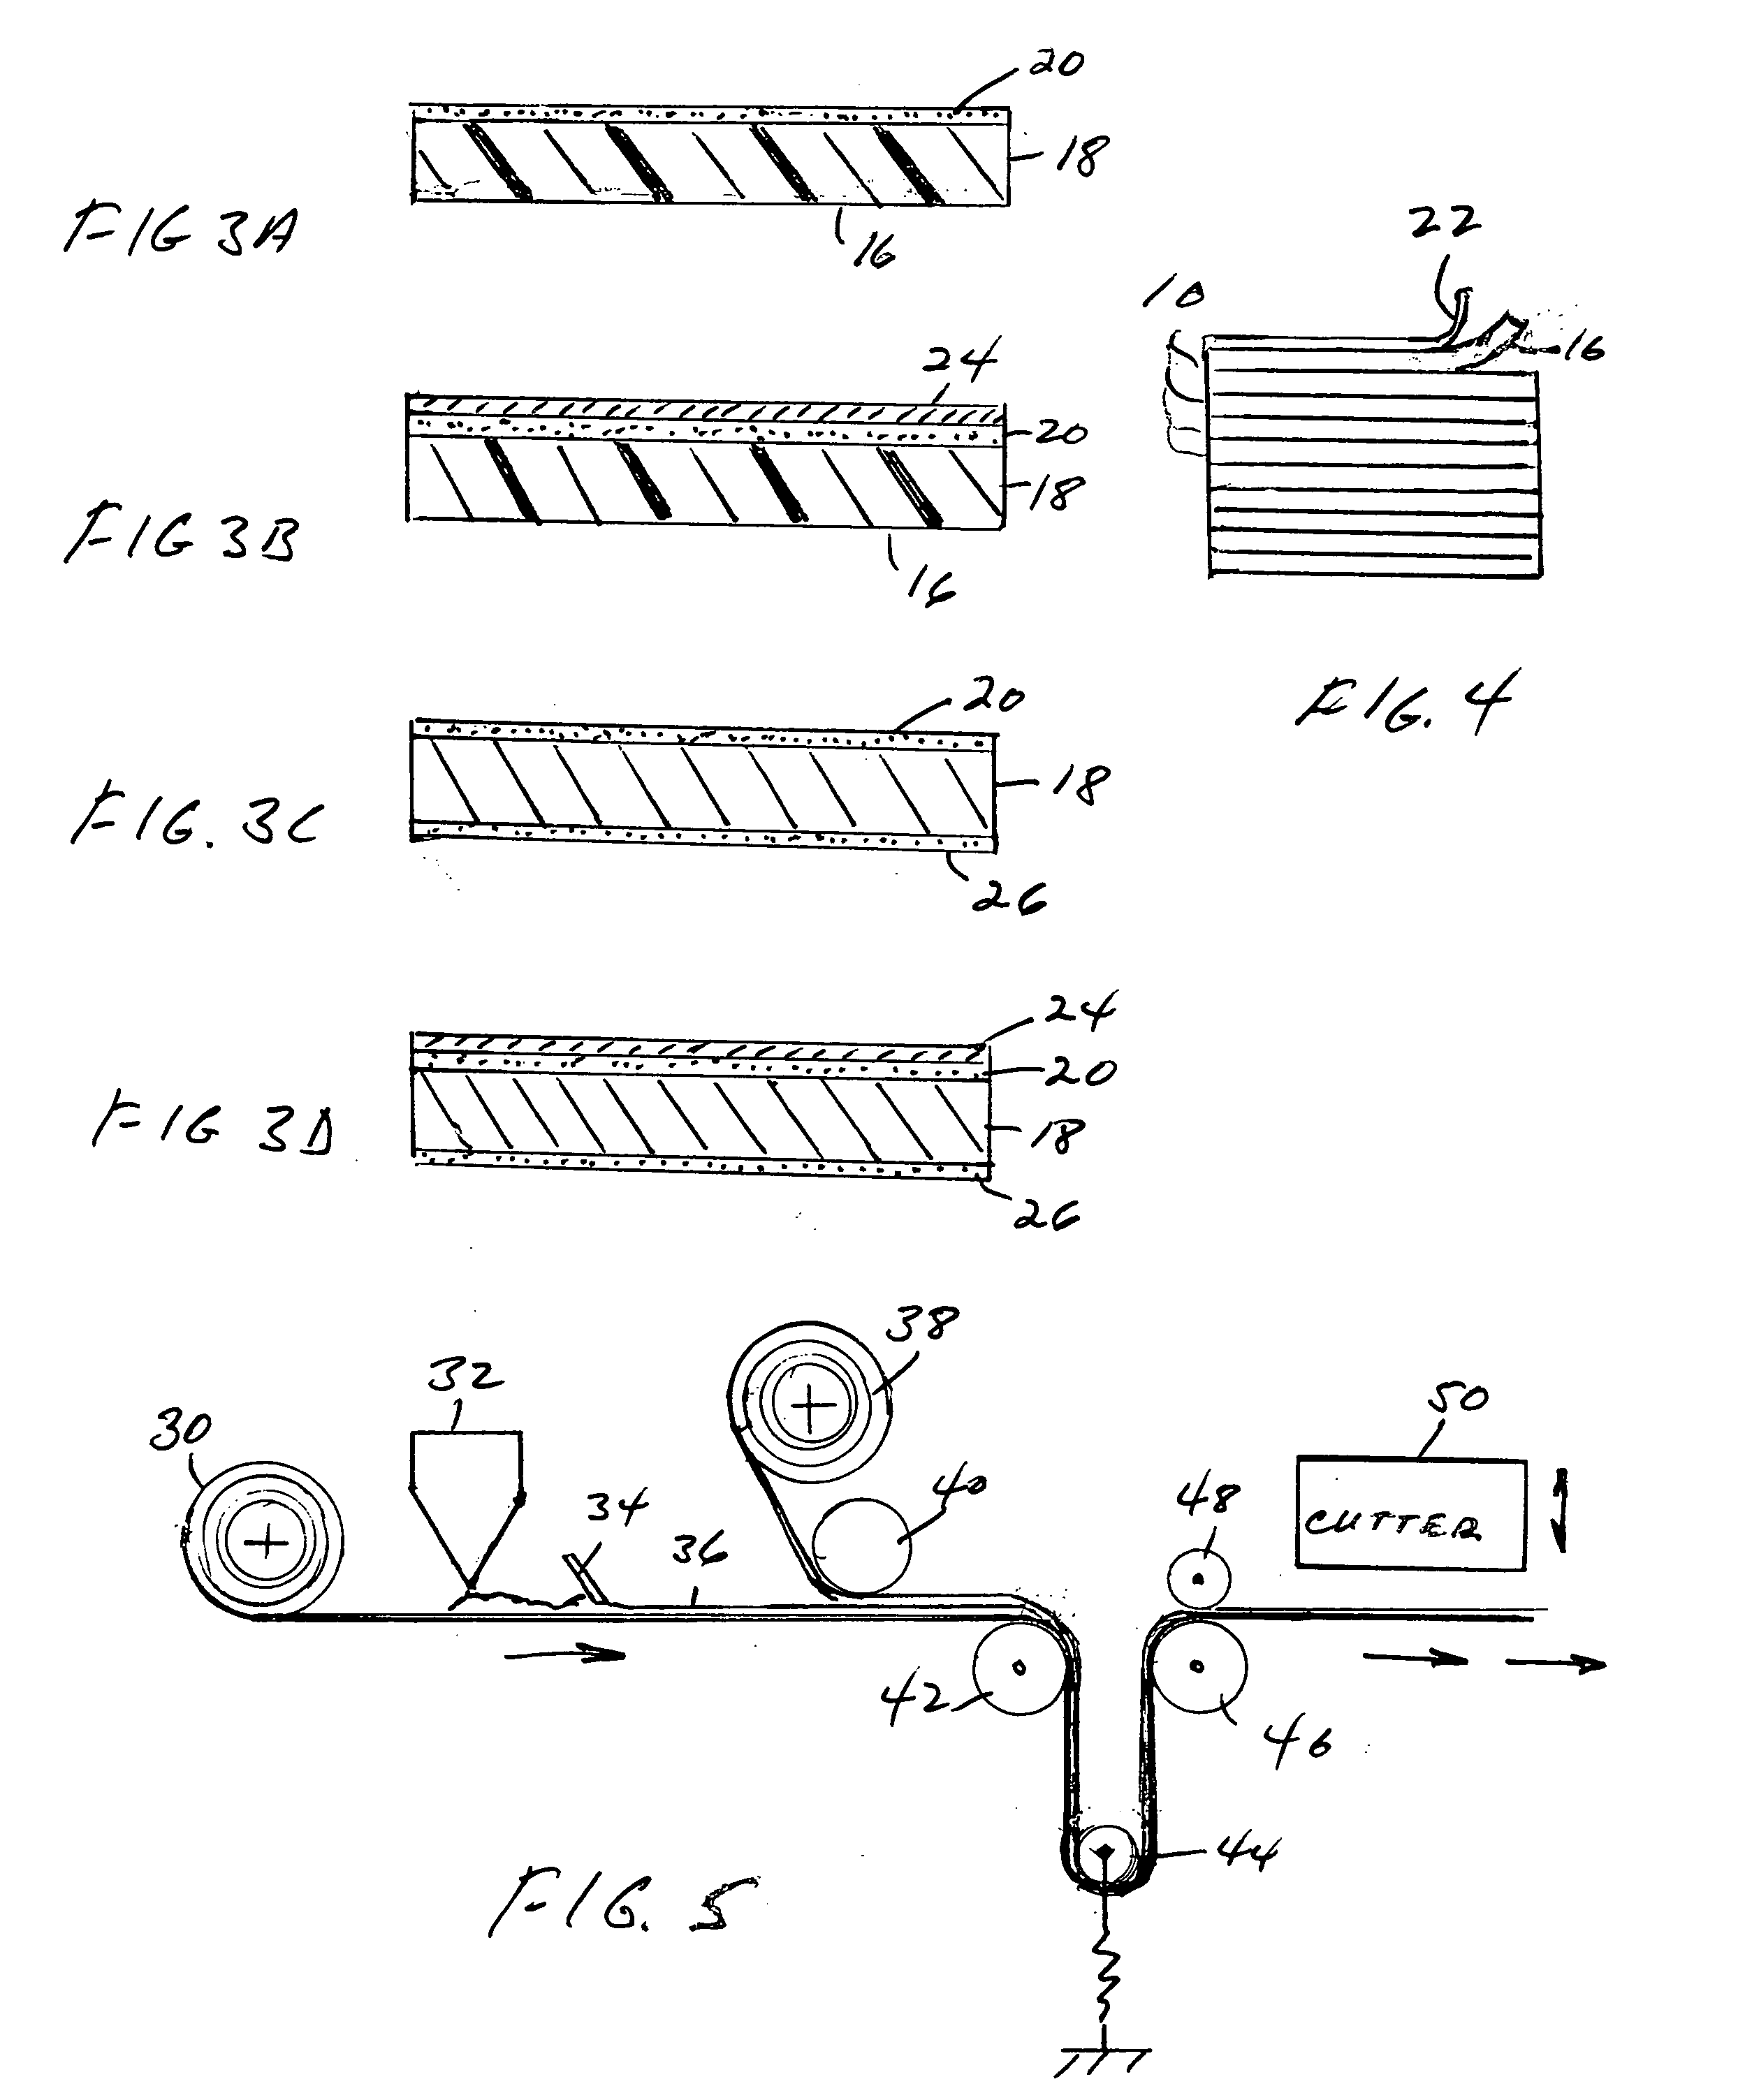 Attachable non-slip foot sole and methods of manufacturing and using the same